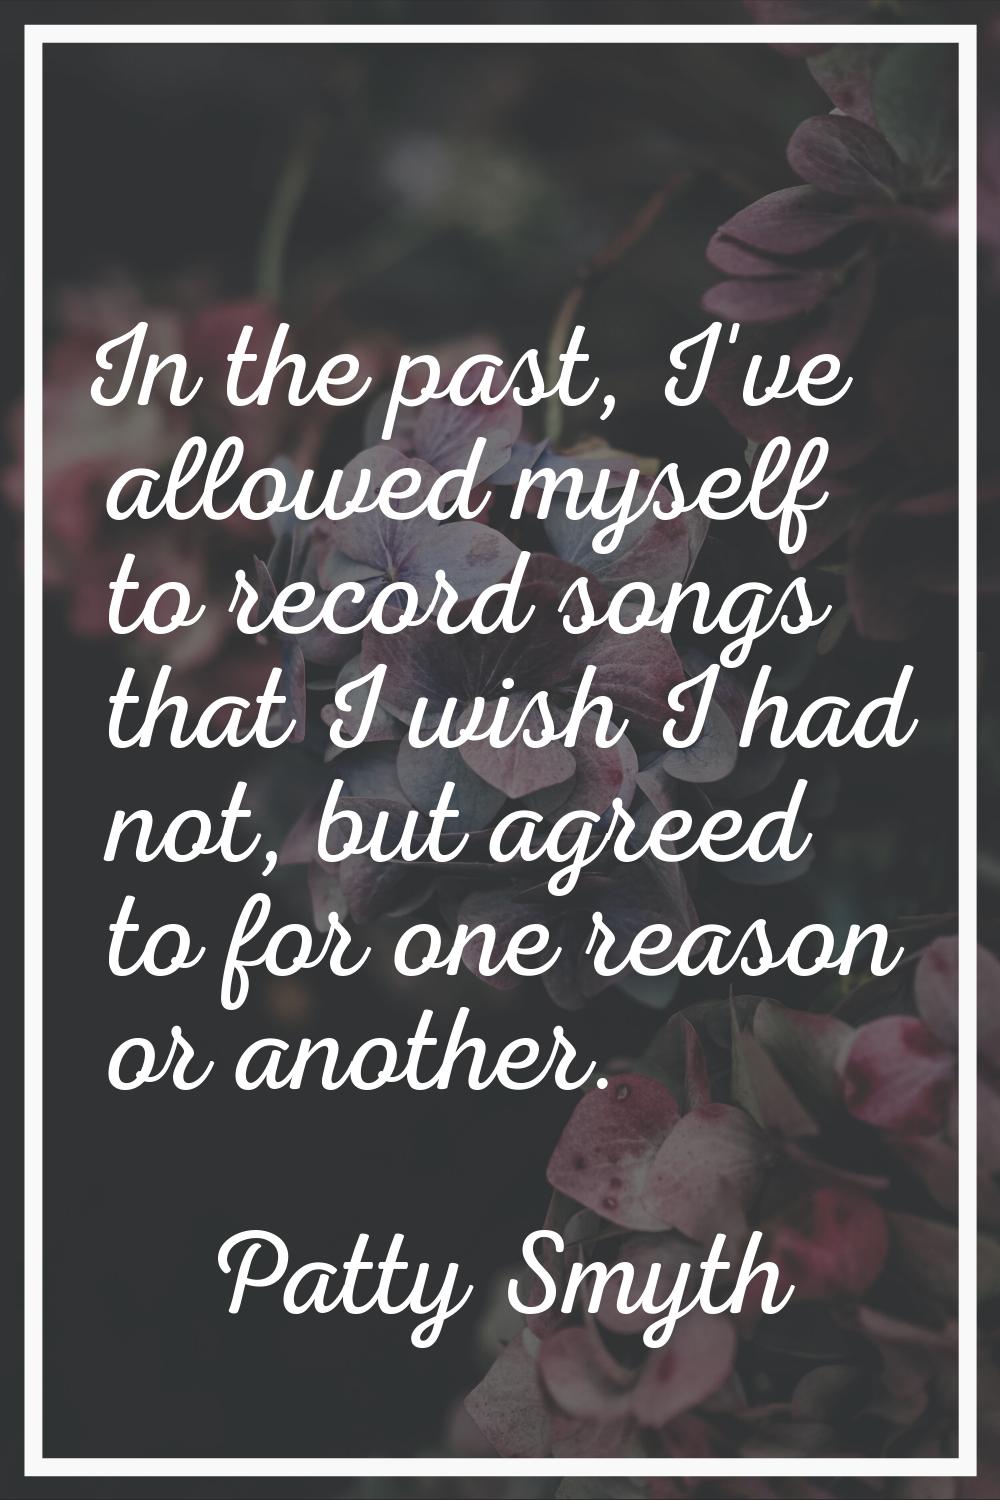 In the past, I've allowed myself to record songs that I wish I had not, but agreed to for one reaso